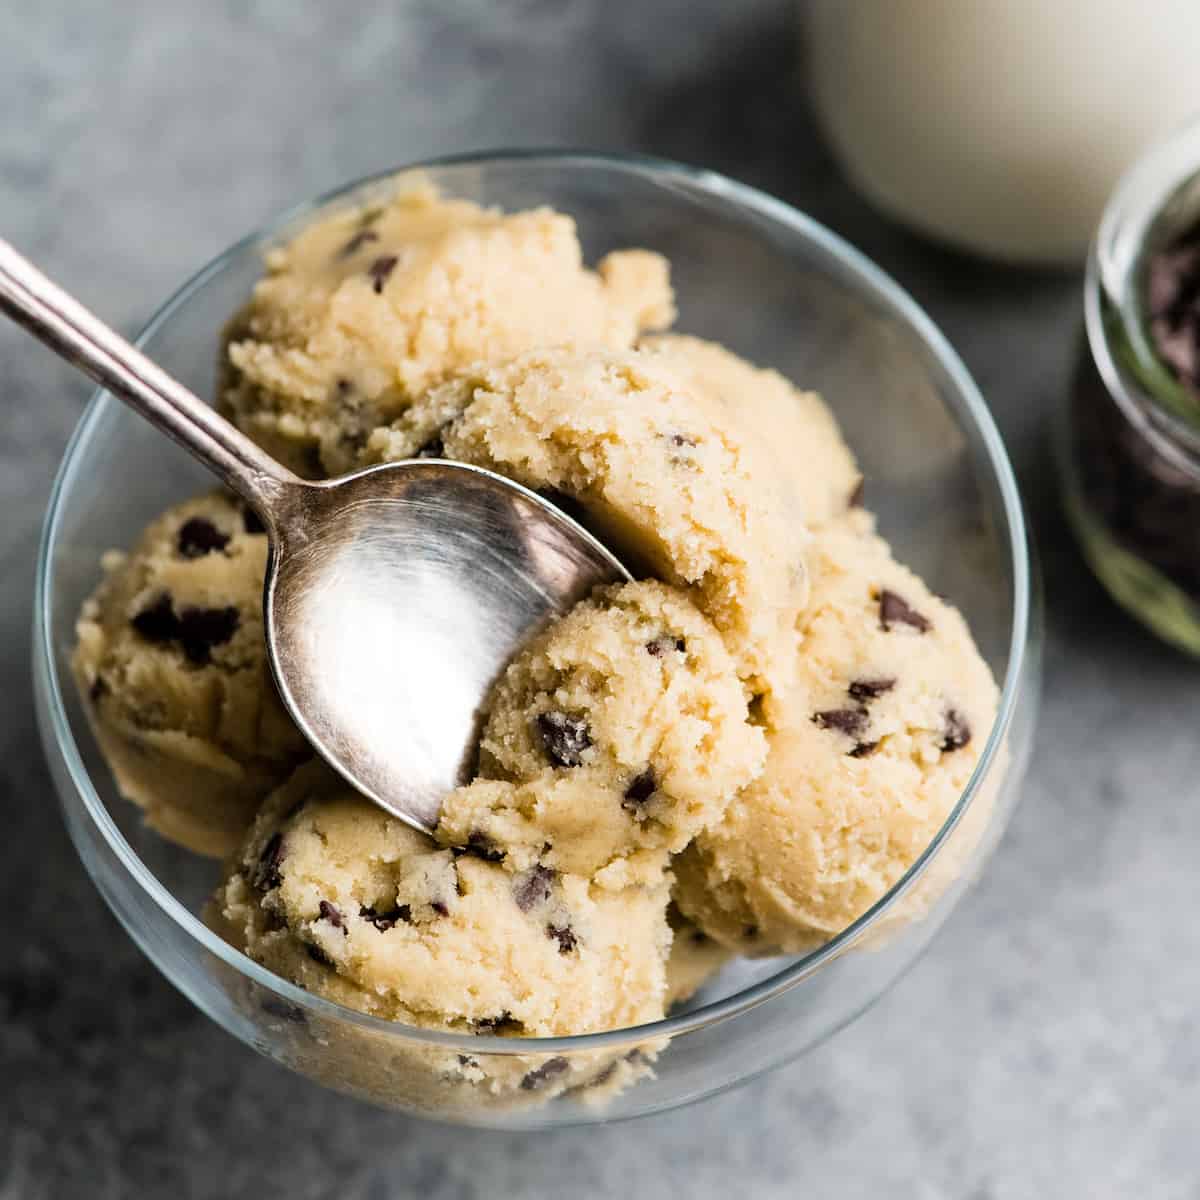 up close overhead view of a spoonful of Edible Cookie Dough resting on the rest of the cookie dough in a glass dish